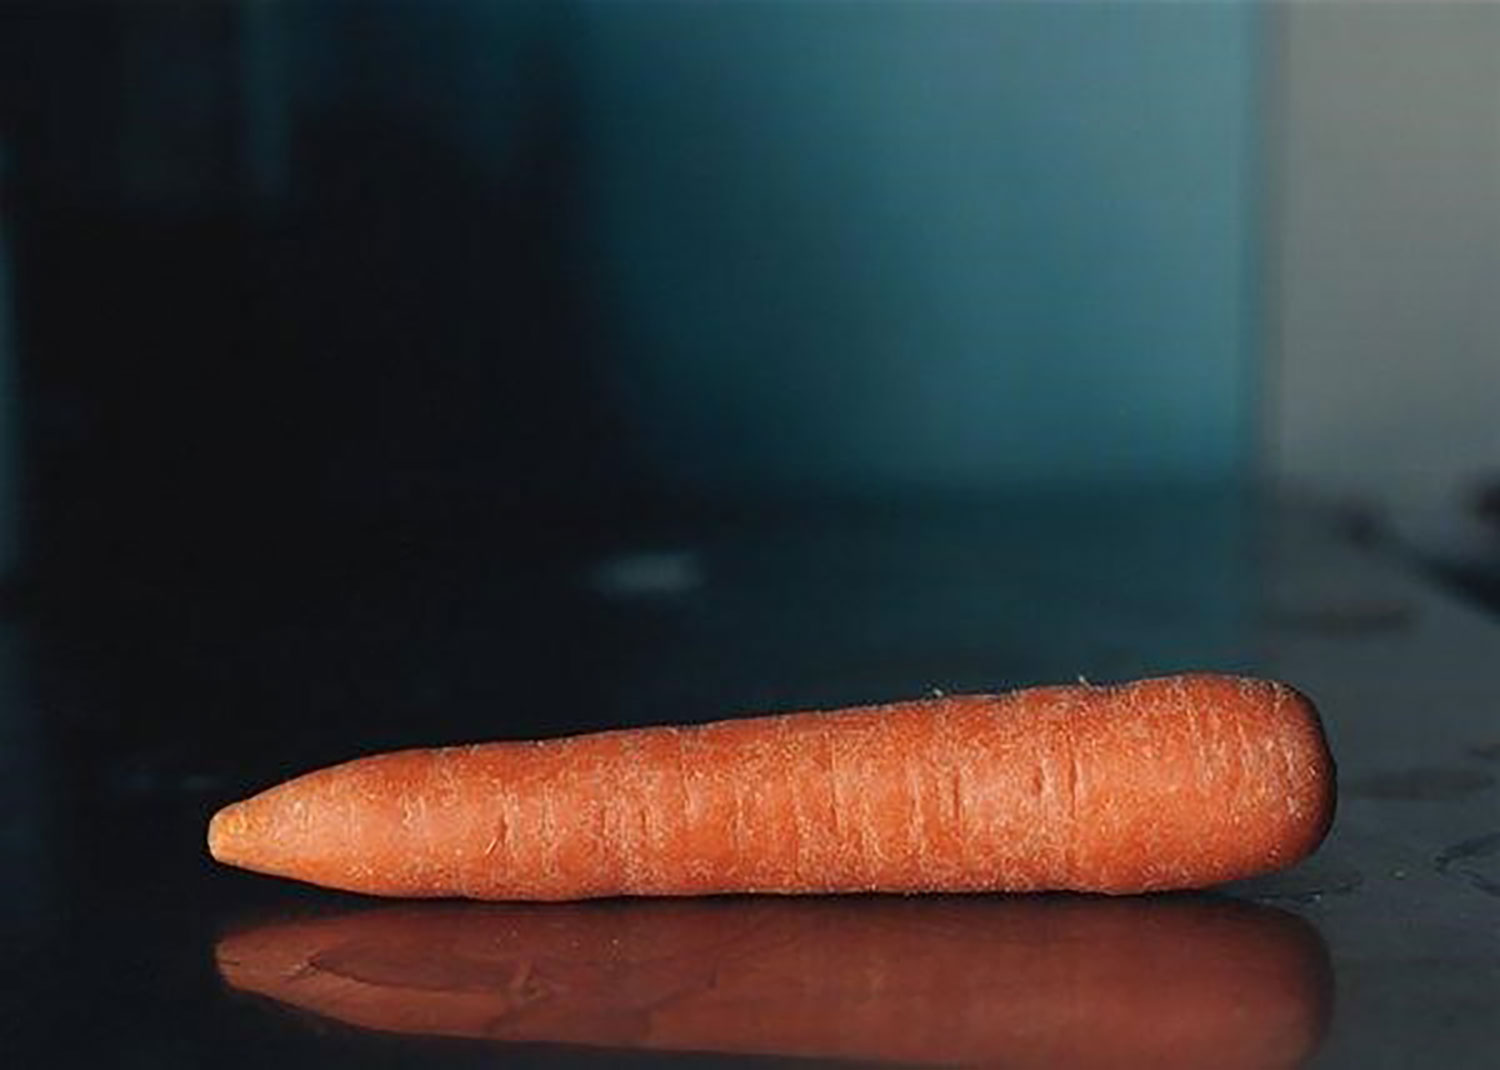 Figure 3, Olivier Richon, Literary Carrot, After Emile Zola, 2000.